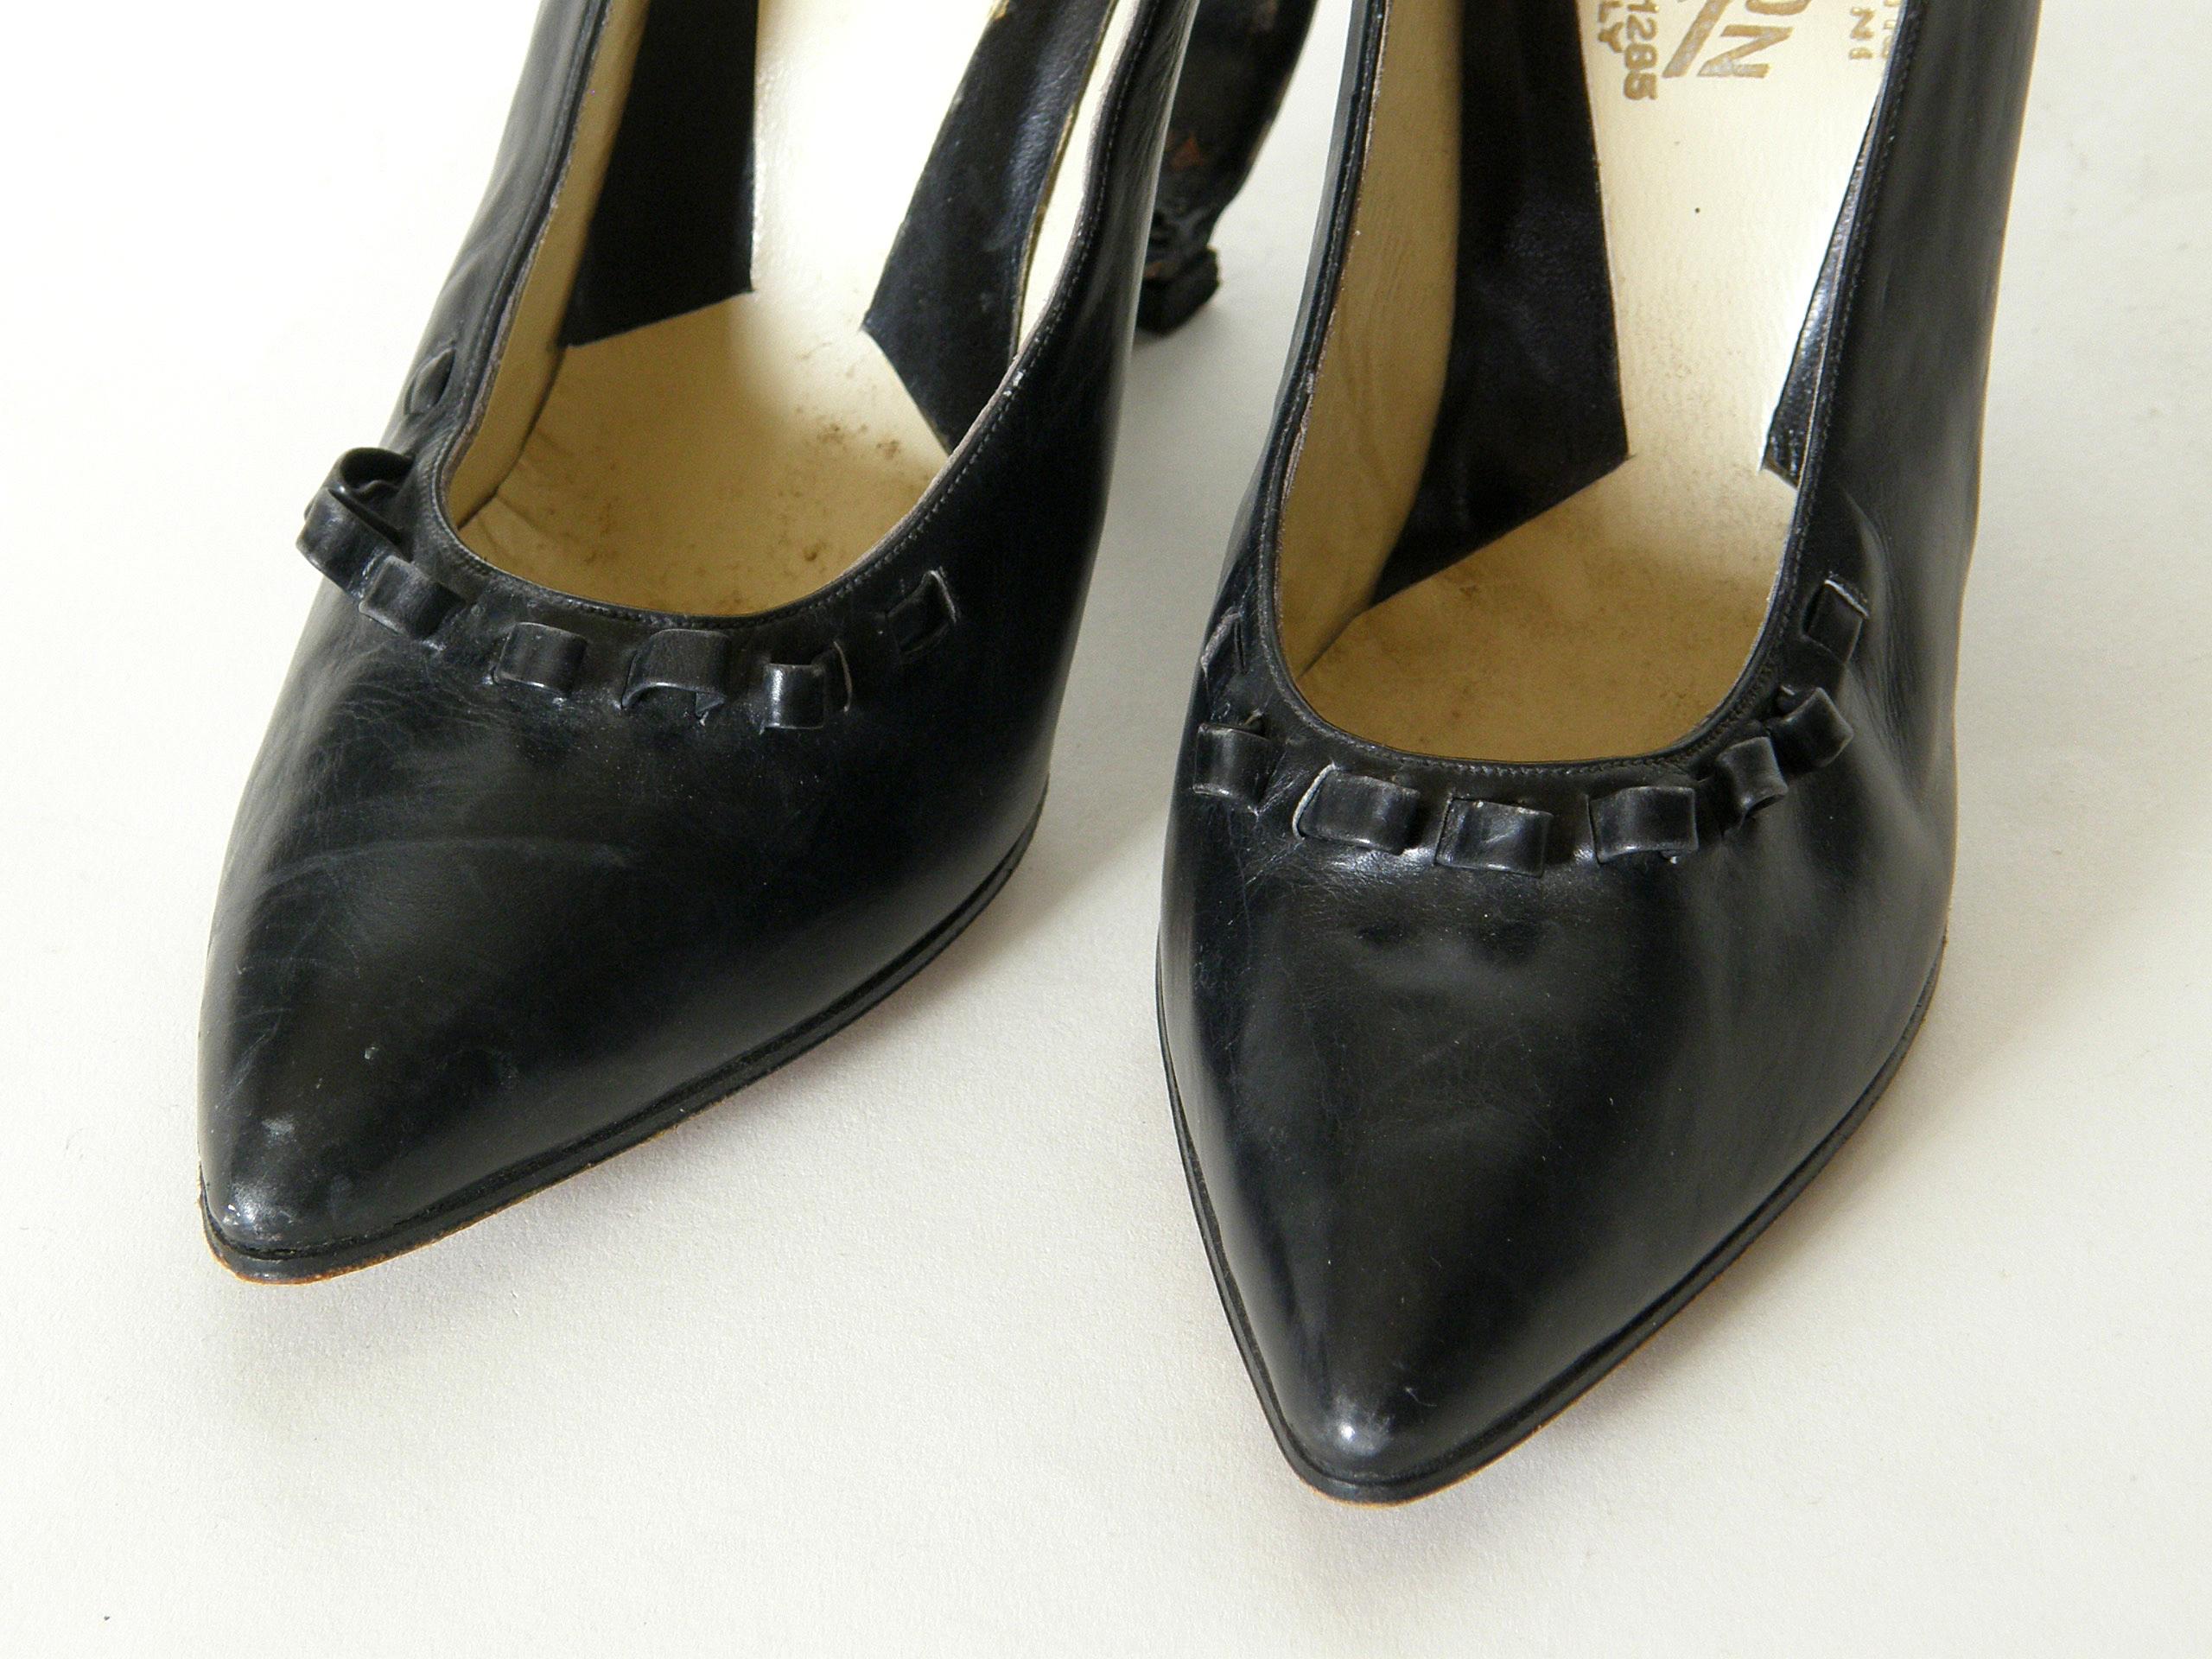 Unworn Albion Black Leather Musical Theme Pumps with G-Clef Heel Design 1